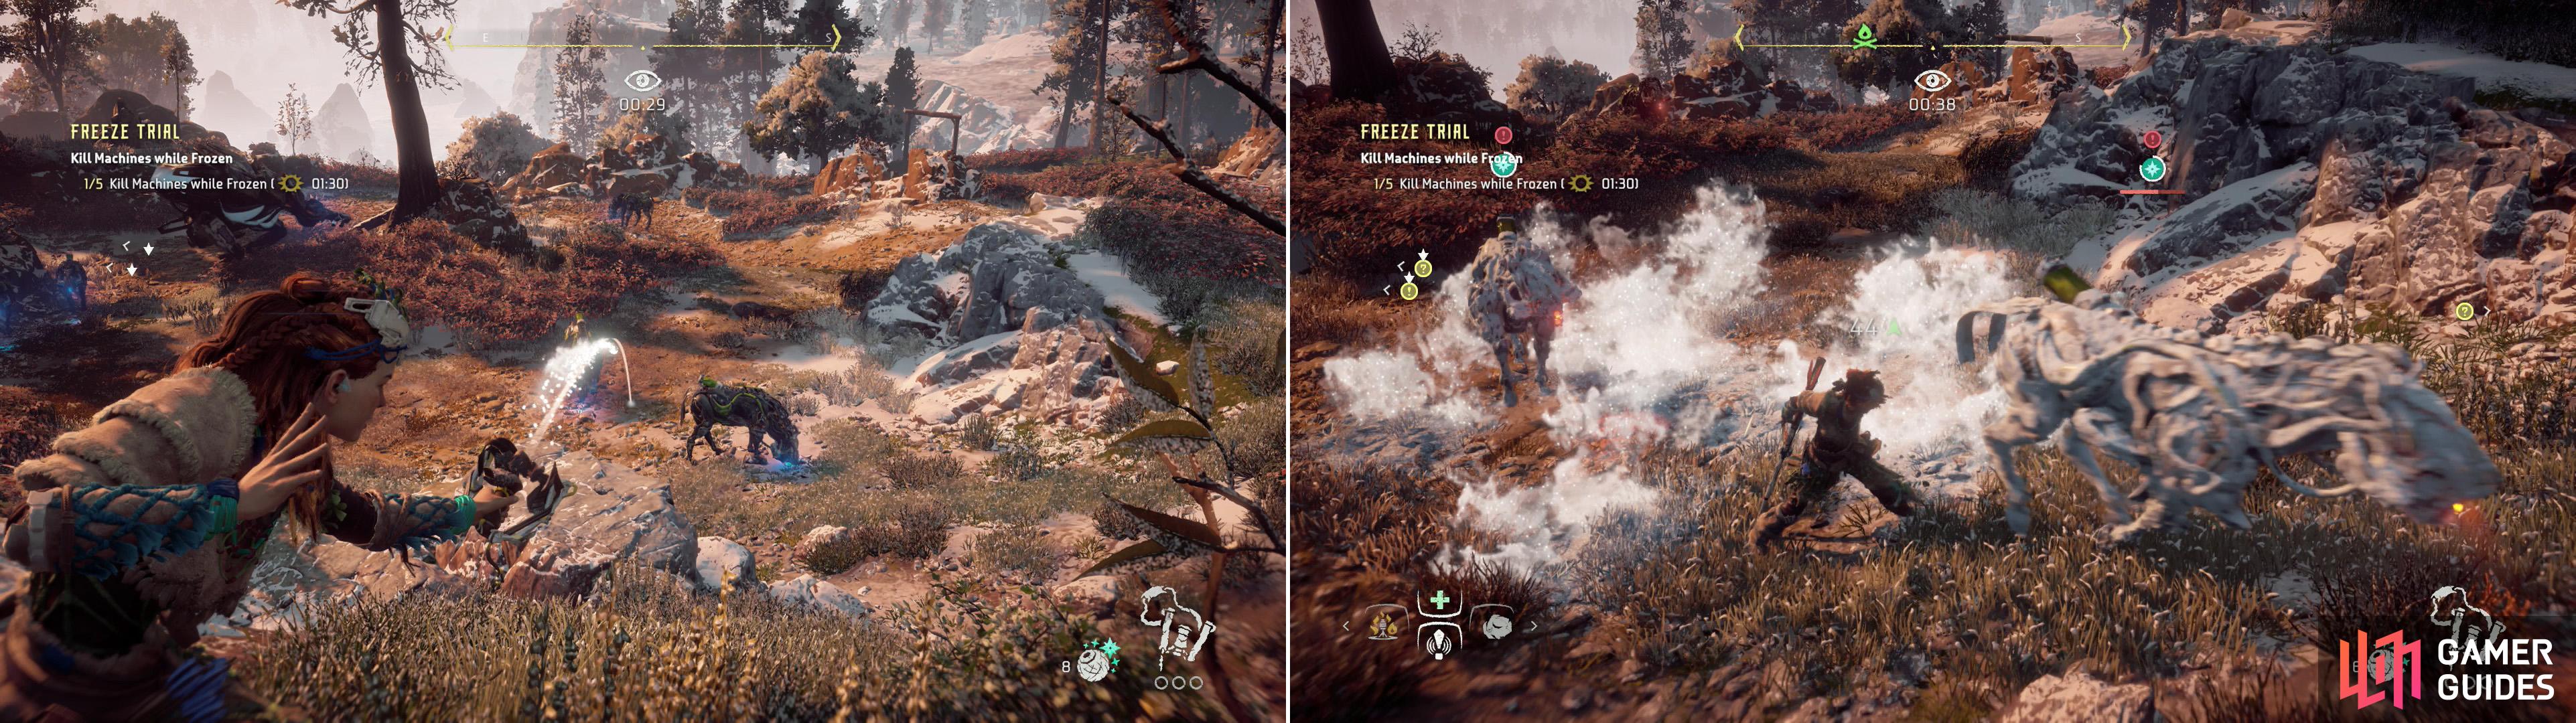 Use the Sling to freeze groups of Striders (left) then quickly dispatch them in melee (right).